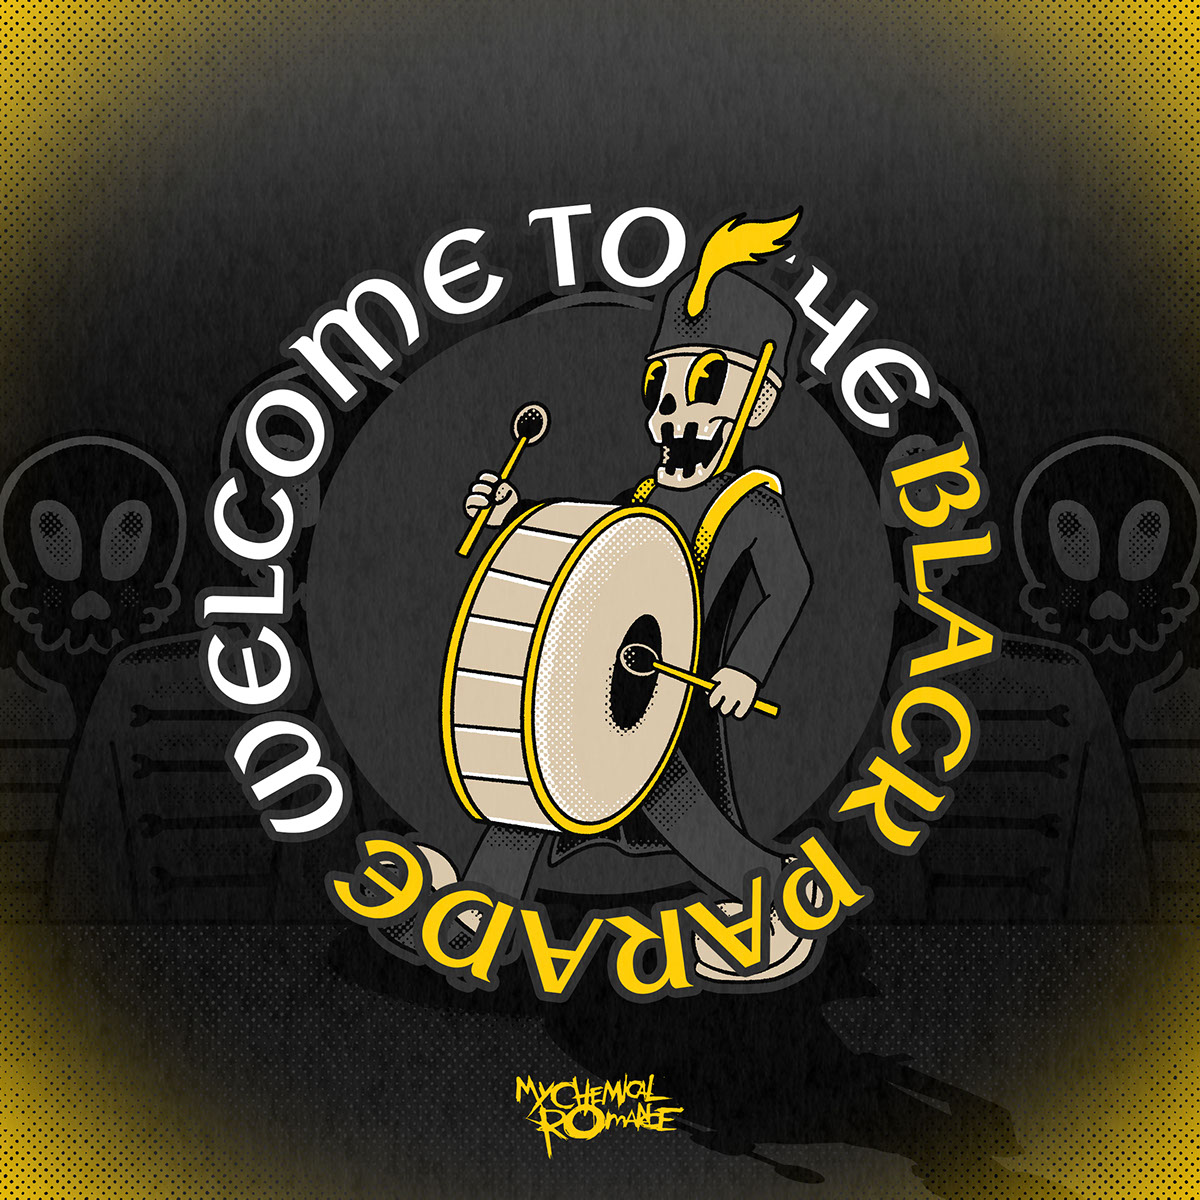 Welcome to The Black Parade rendition image